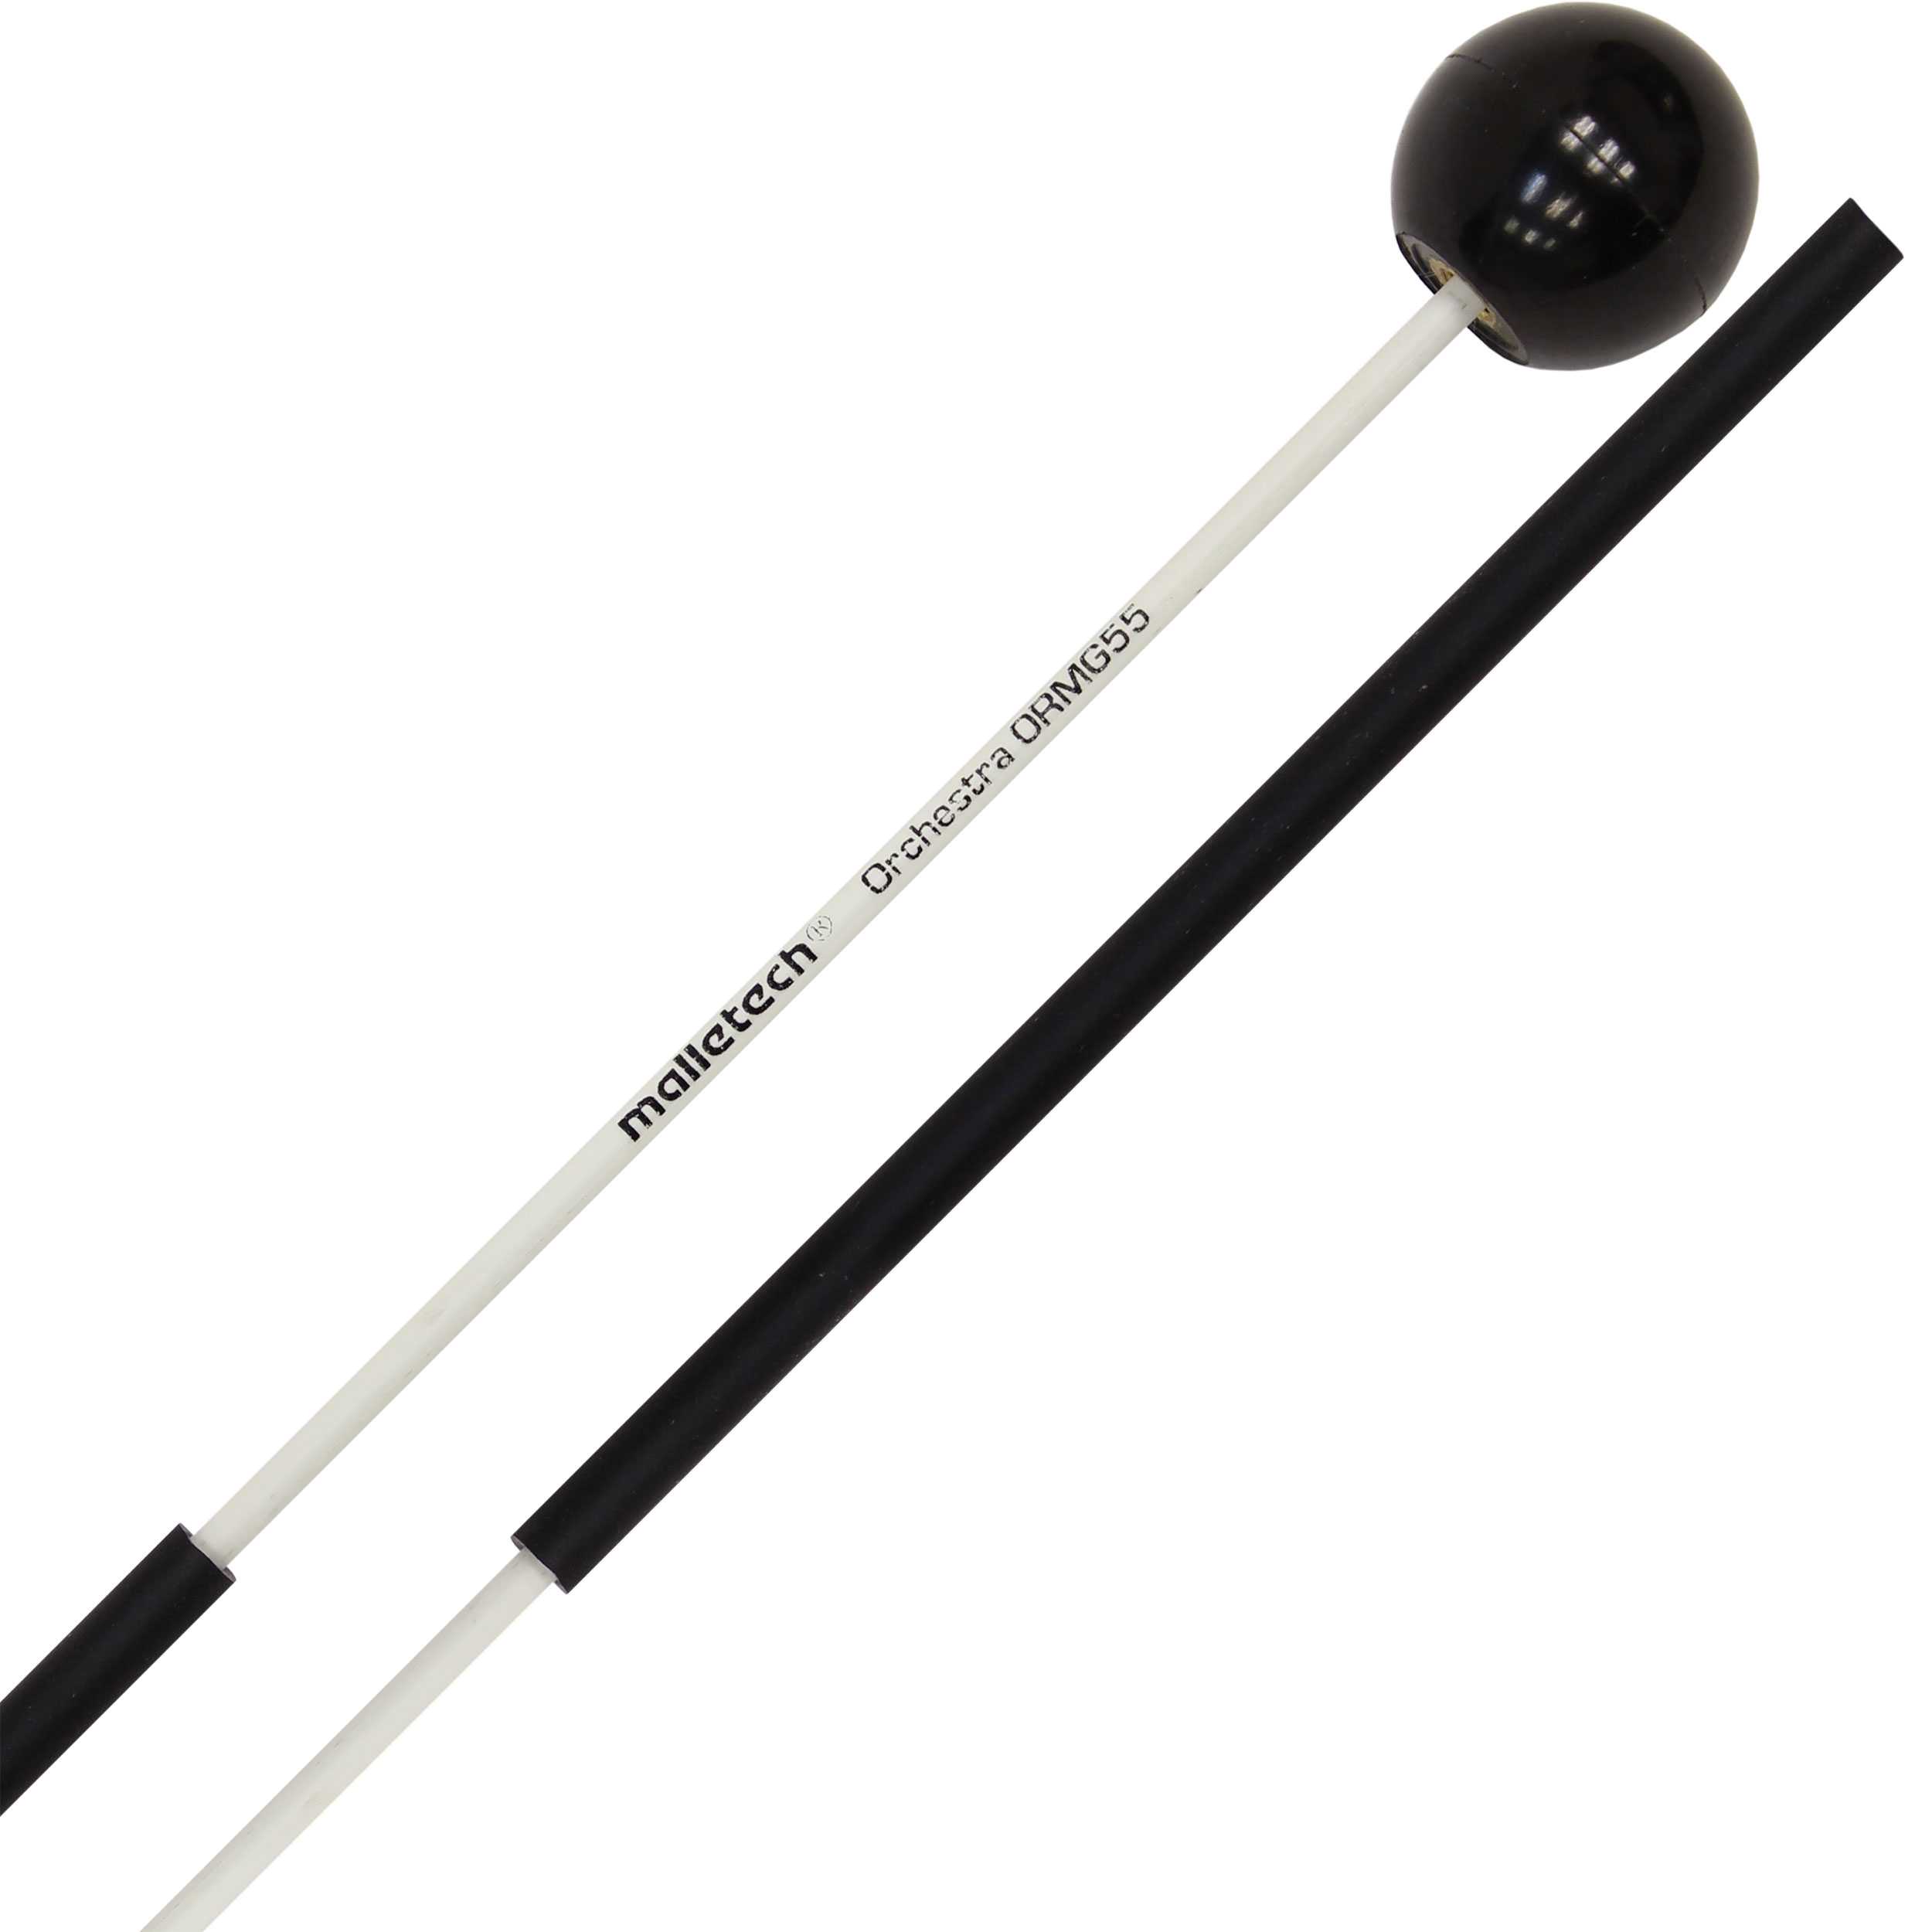 Malletech ORMG55 Orchestral Series Plastic Bell Mallets